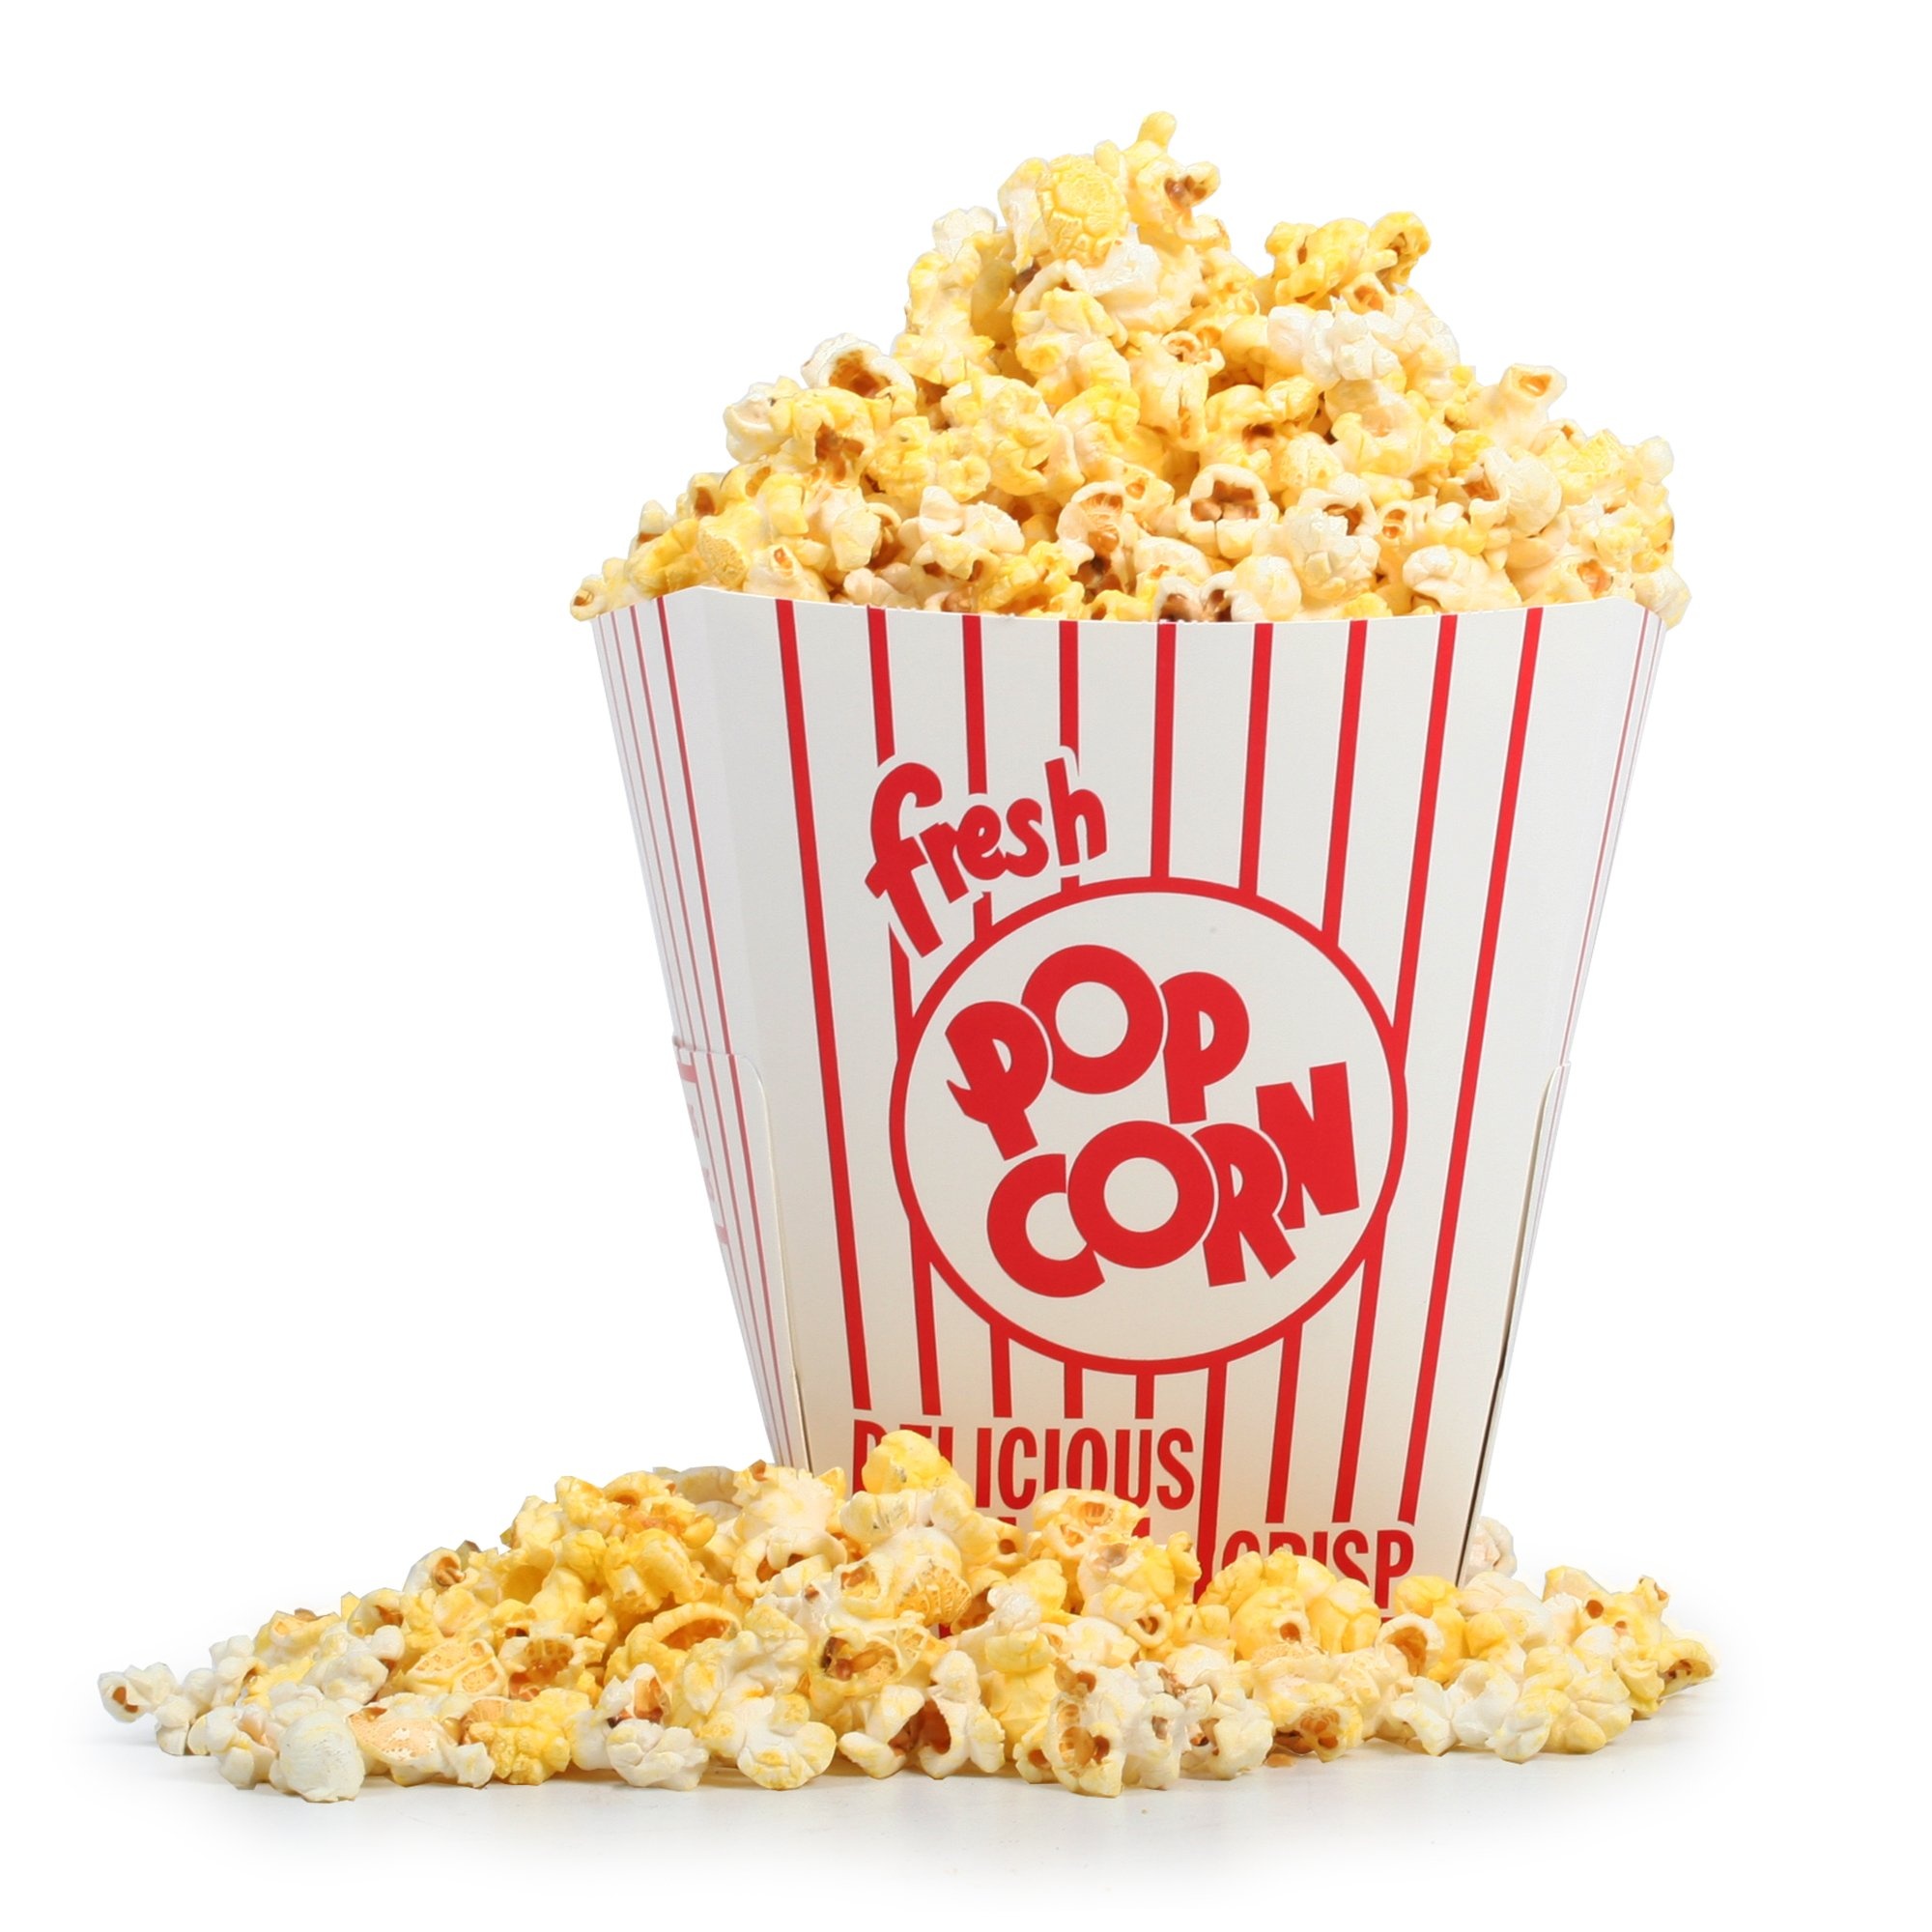 Crunchy snack delight, Popped corn kernels, Movie theater treat, Savory butter flavor, 2000x2000 HD Handy